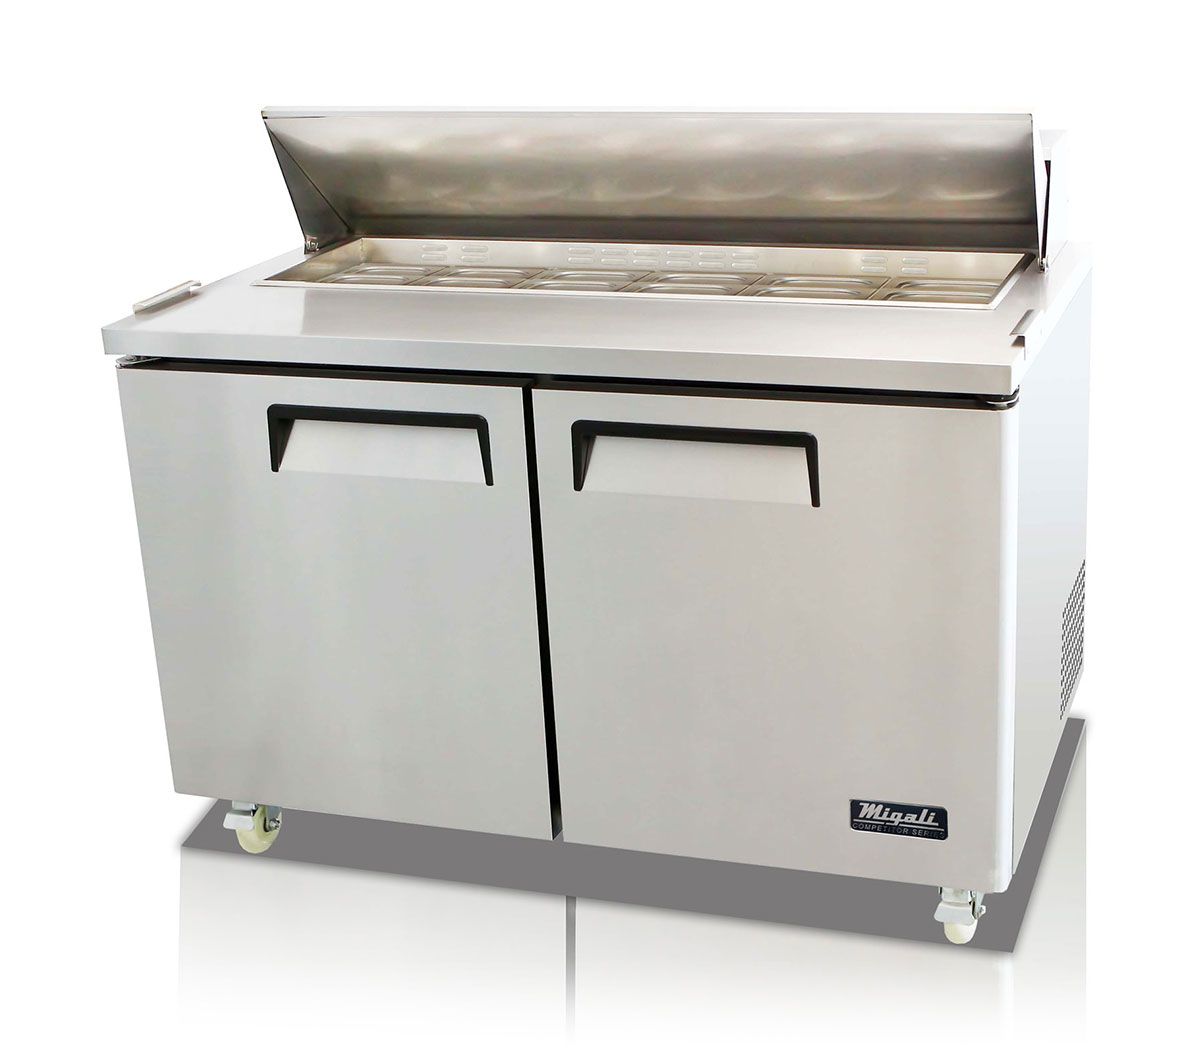 C-sp60-16-hc 60.2 In. Competitor Series Refrigerated Counter & Sandwich Preparation Table, Stainless Steel & Galvanized Steel